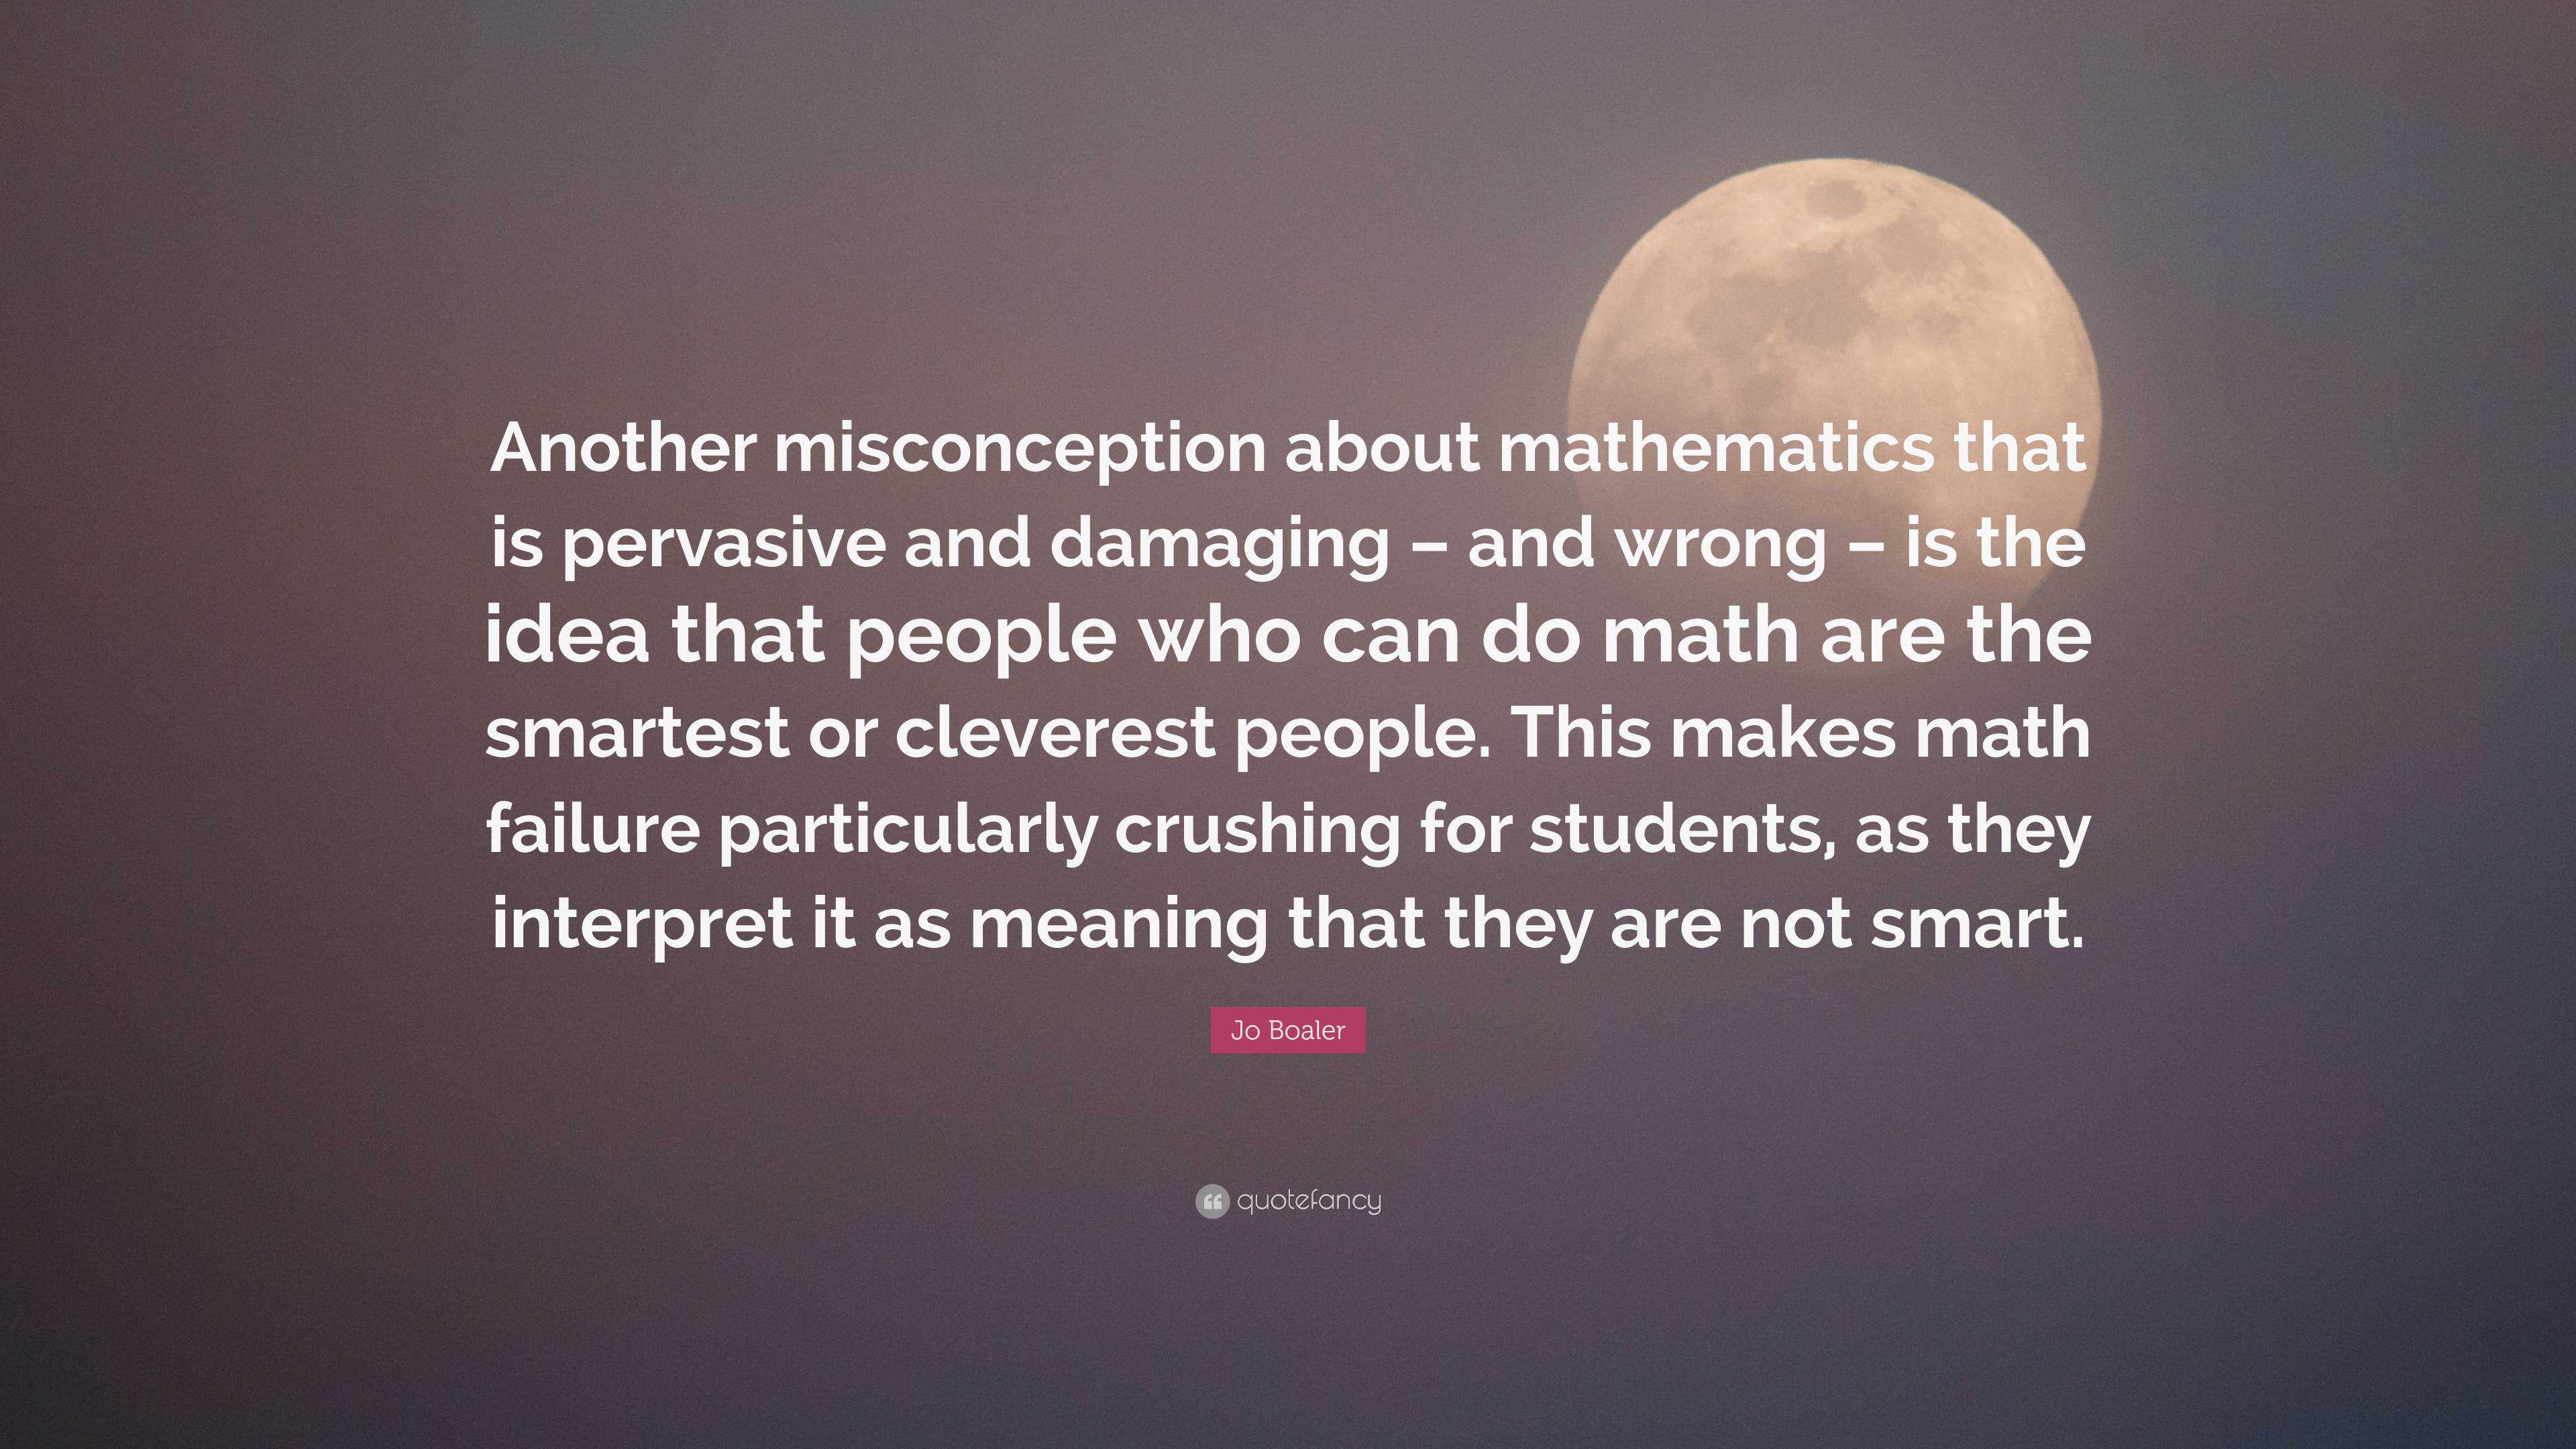 Jo Boaler Quote “Another misconception about mathematics that is